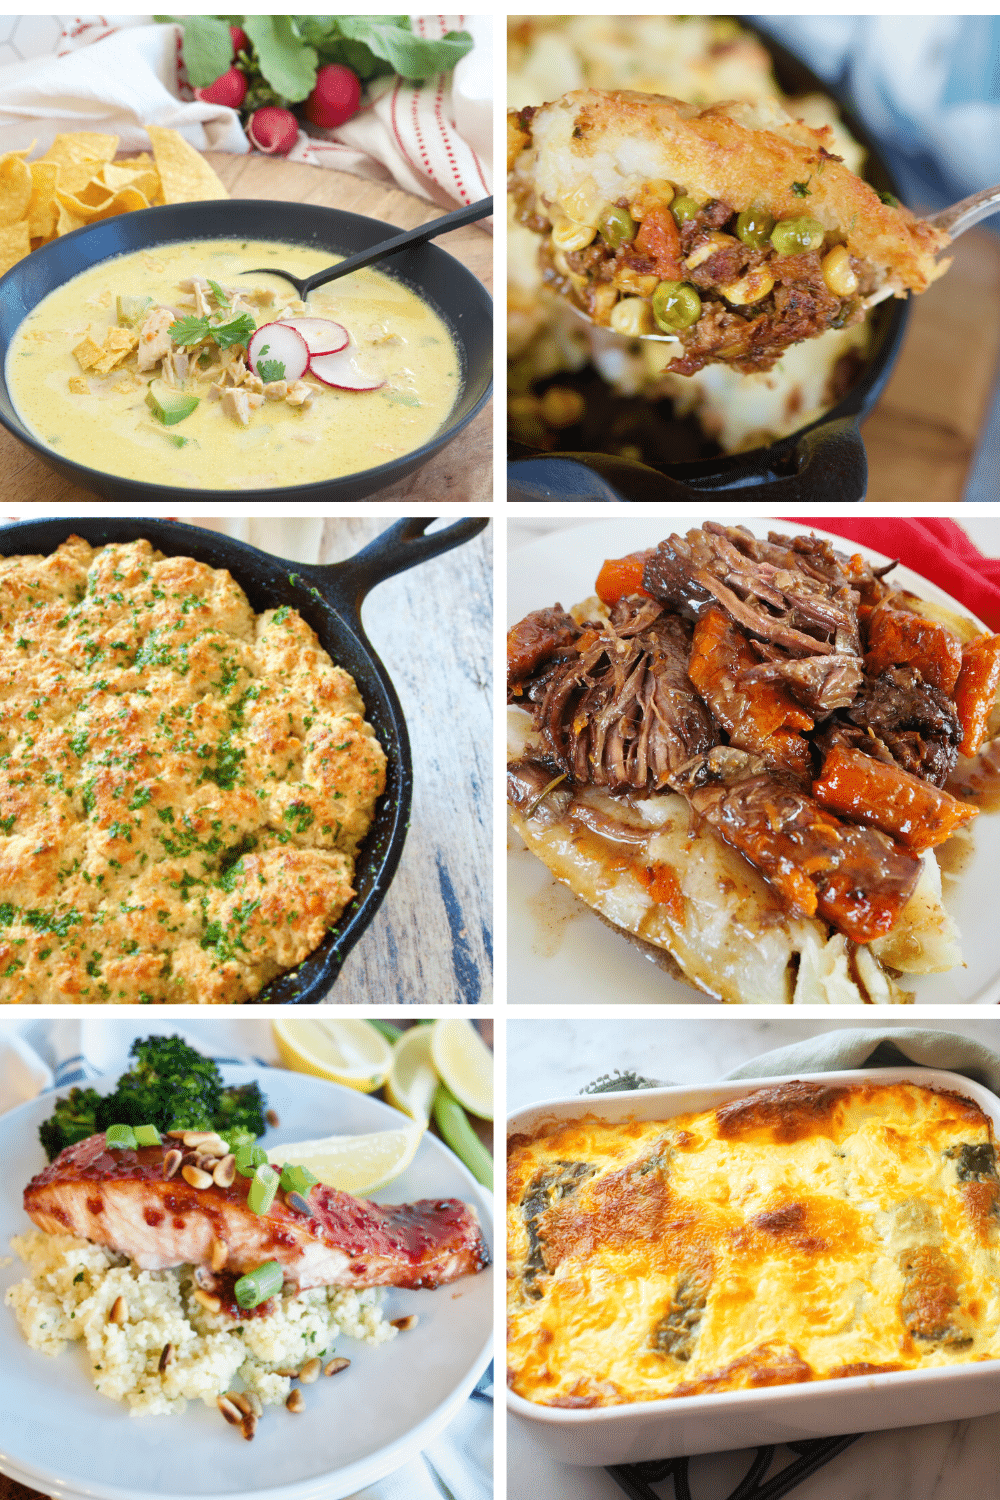 6 grid with images for comfort food recipes L-R poblano soup, shepherd's pie, cheddar bay biscuits, pot roast, raspberry salmon and chile relleno casserole.